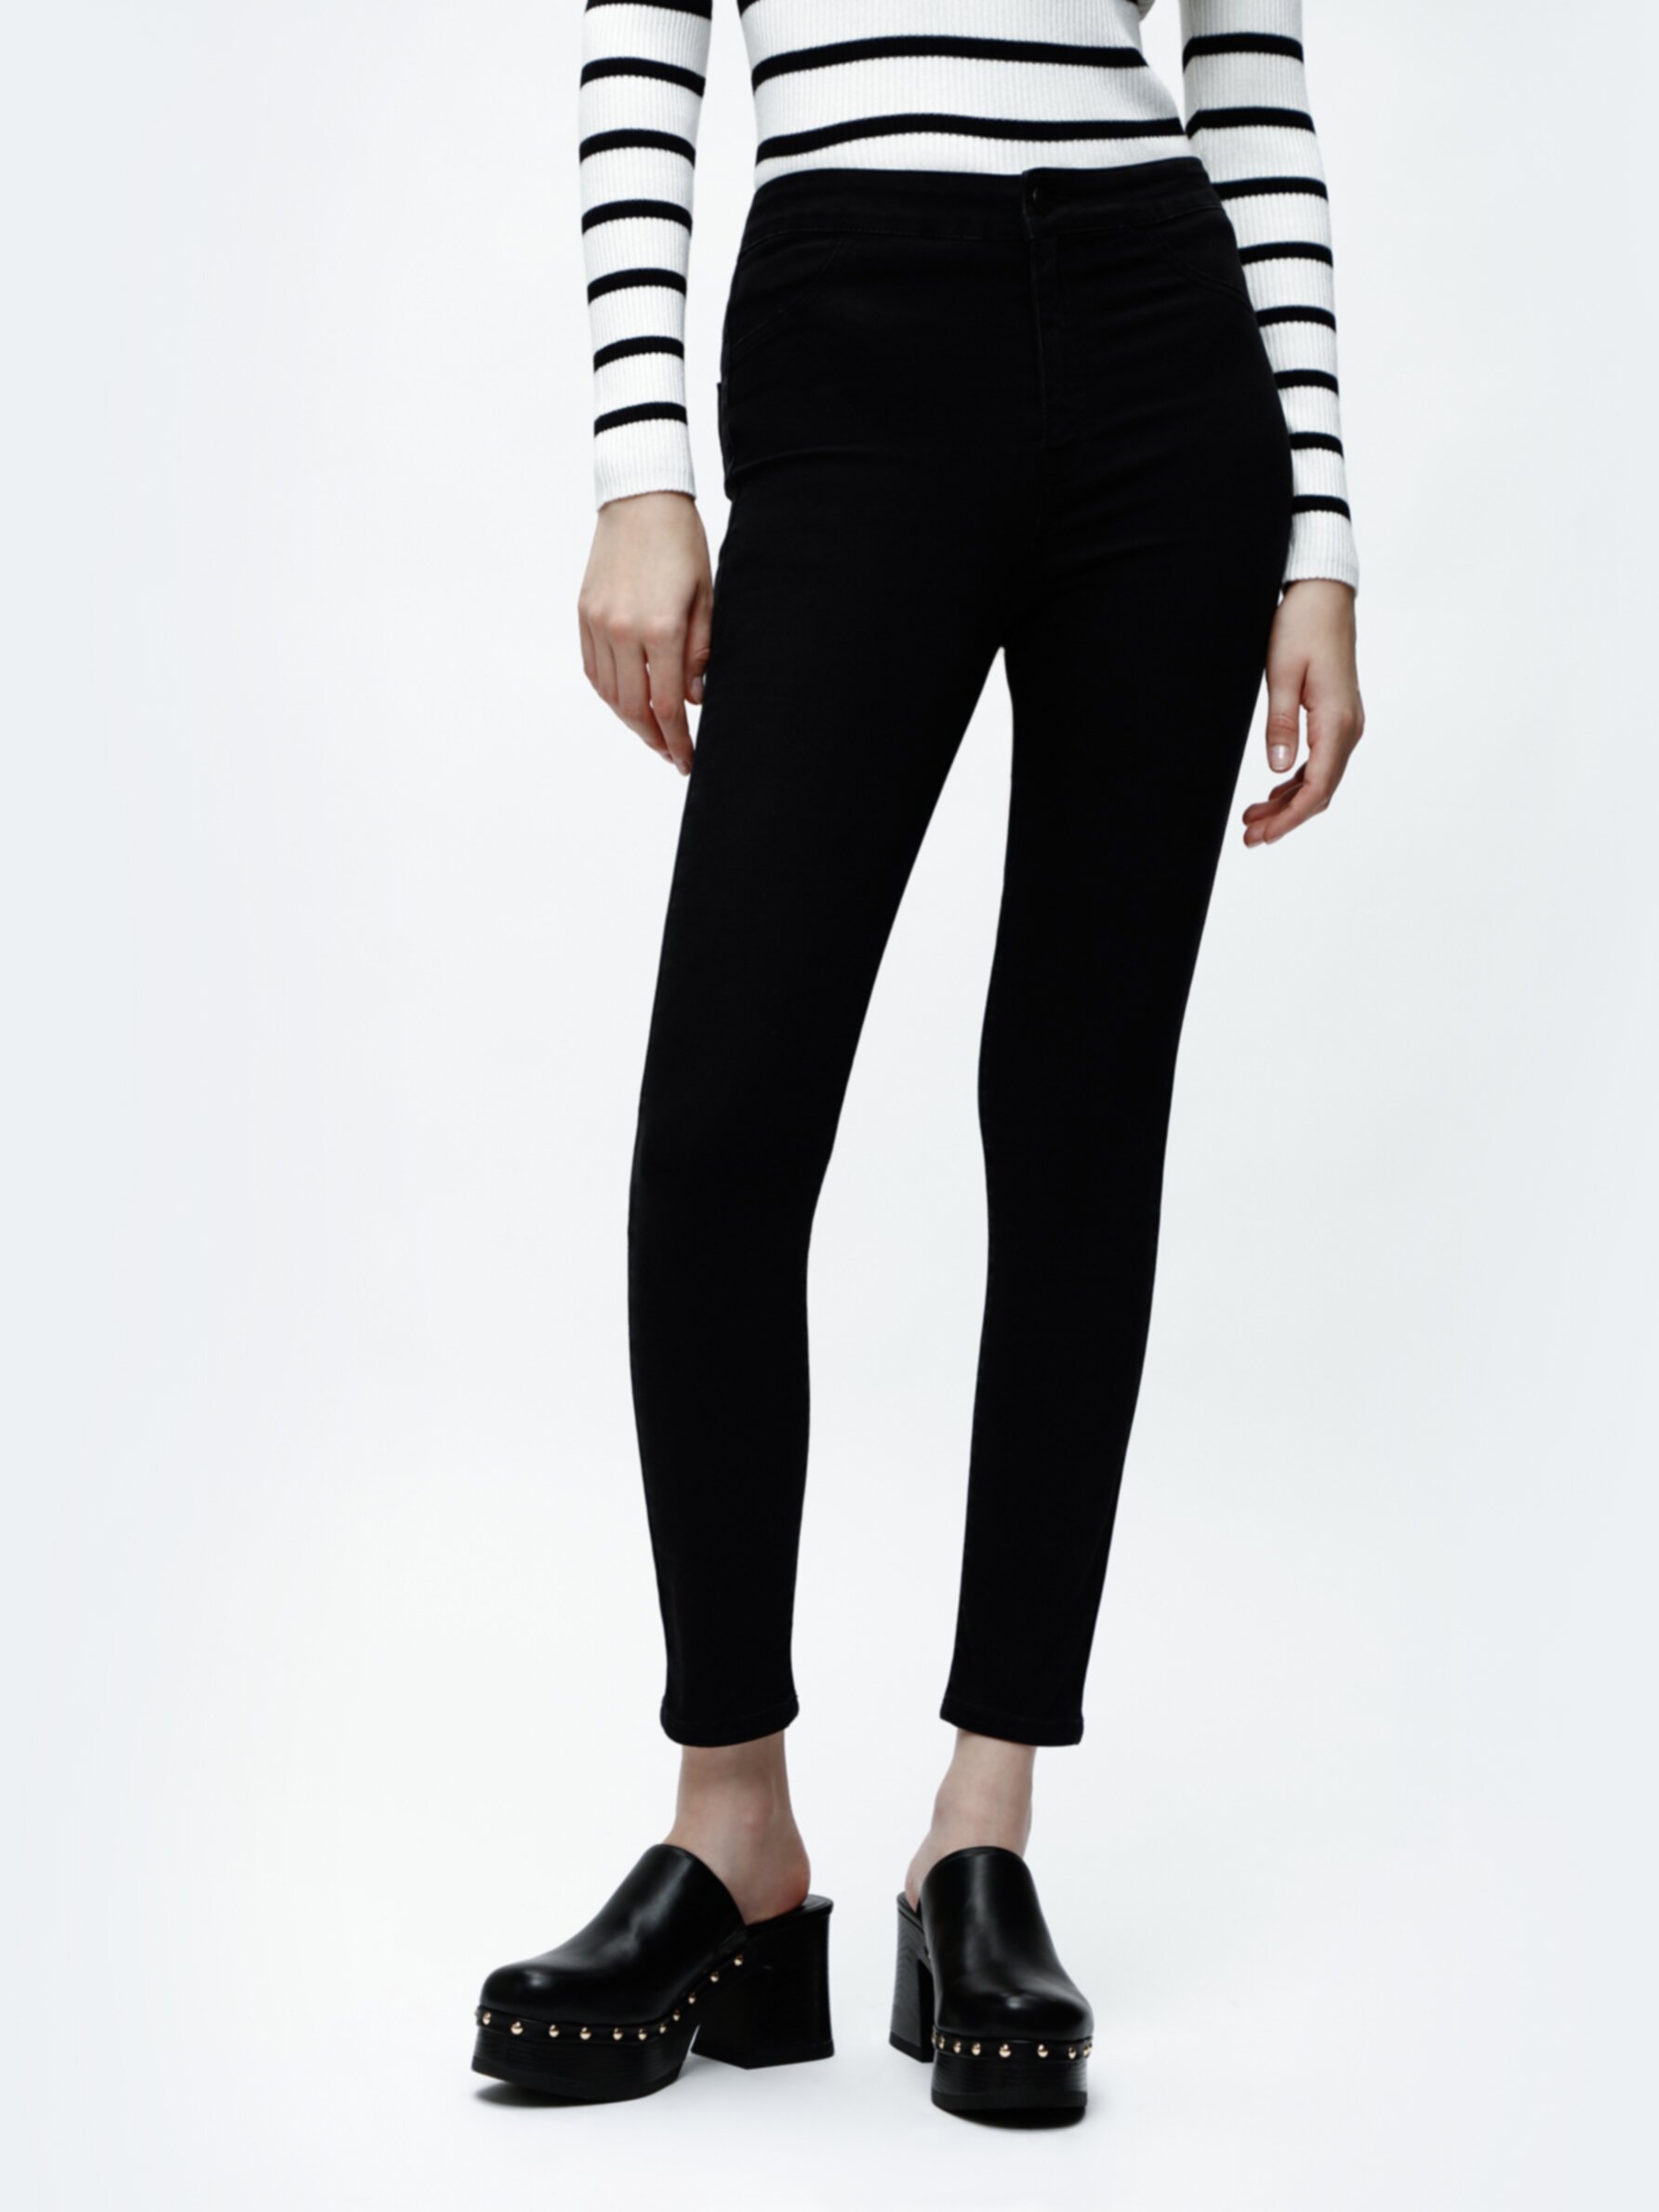 Jeggings - Skinny - Jeans - CLOTHING - Woman 